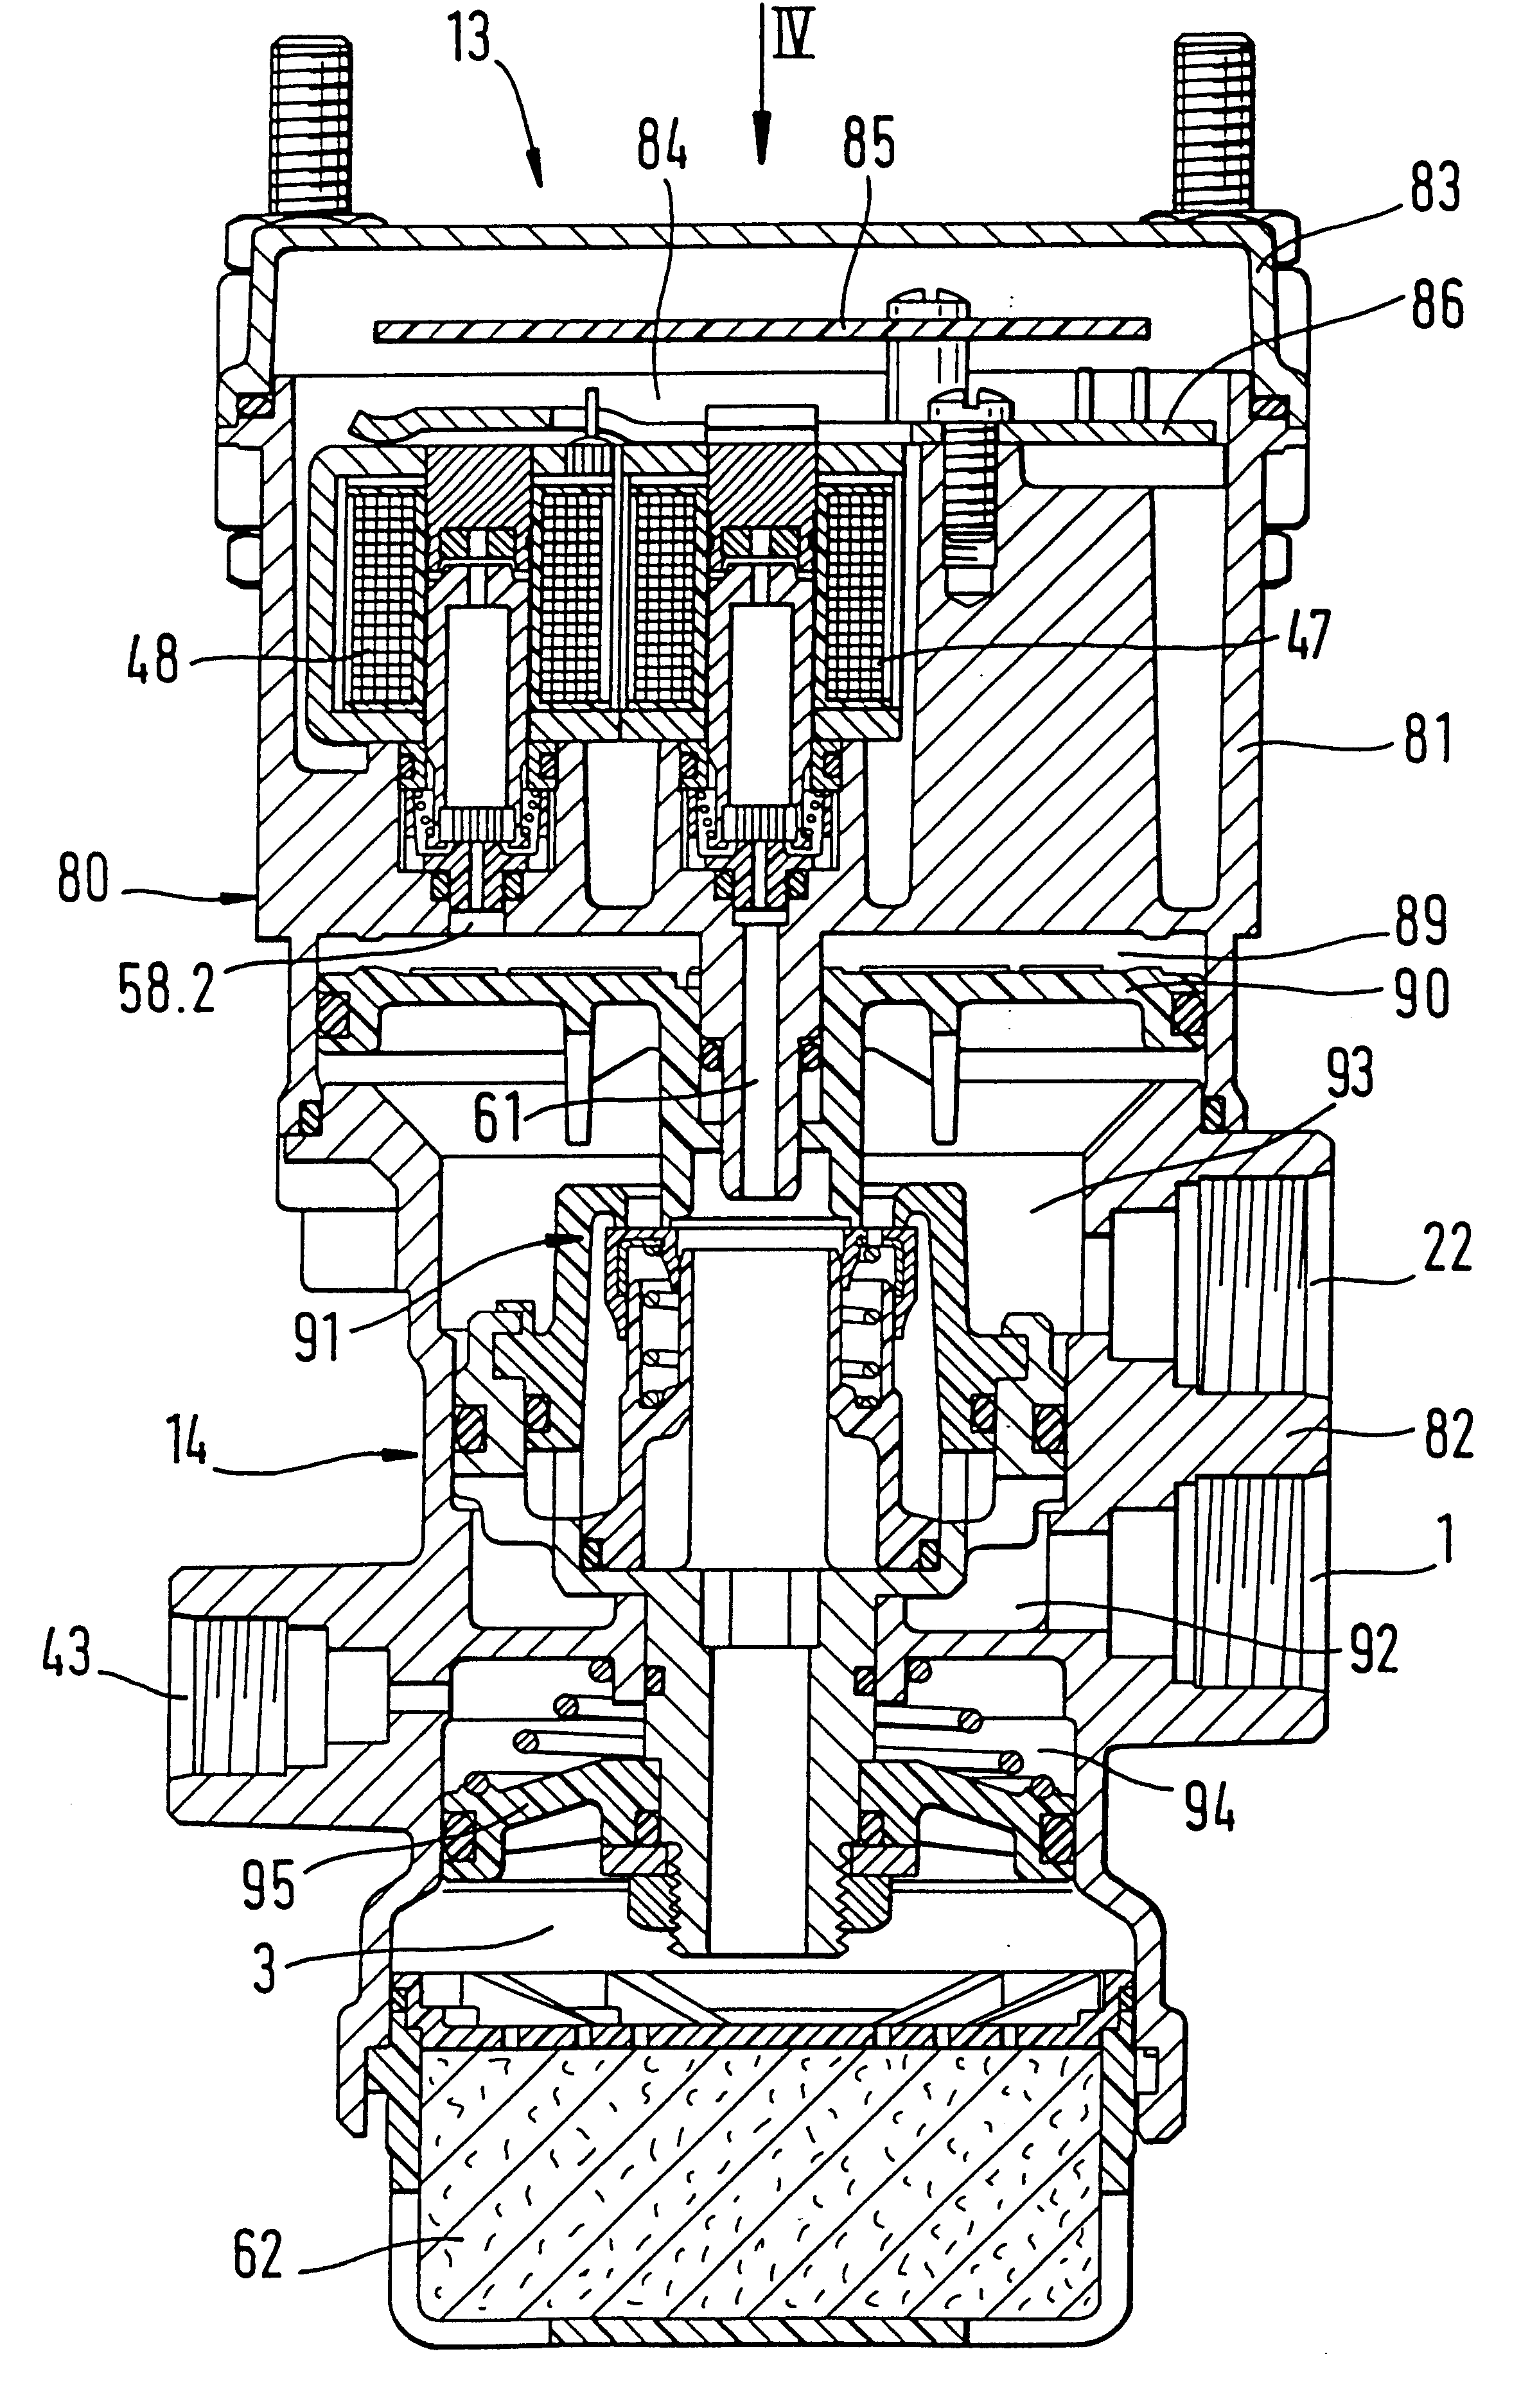 Trailer control valve for a compressed air brake system for motor vehicles